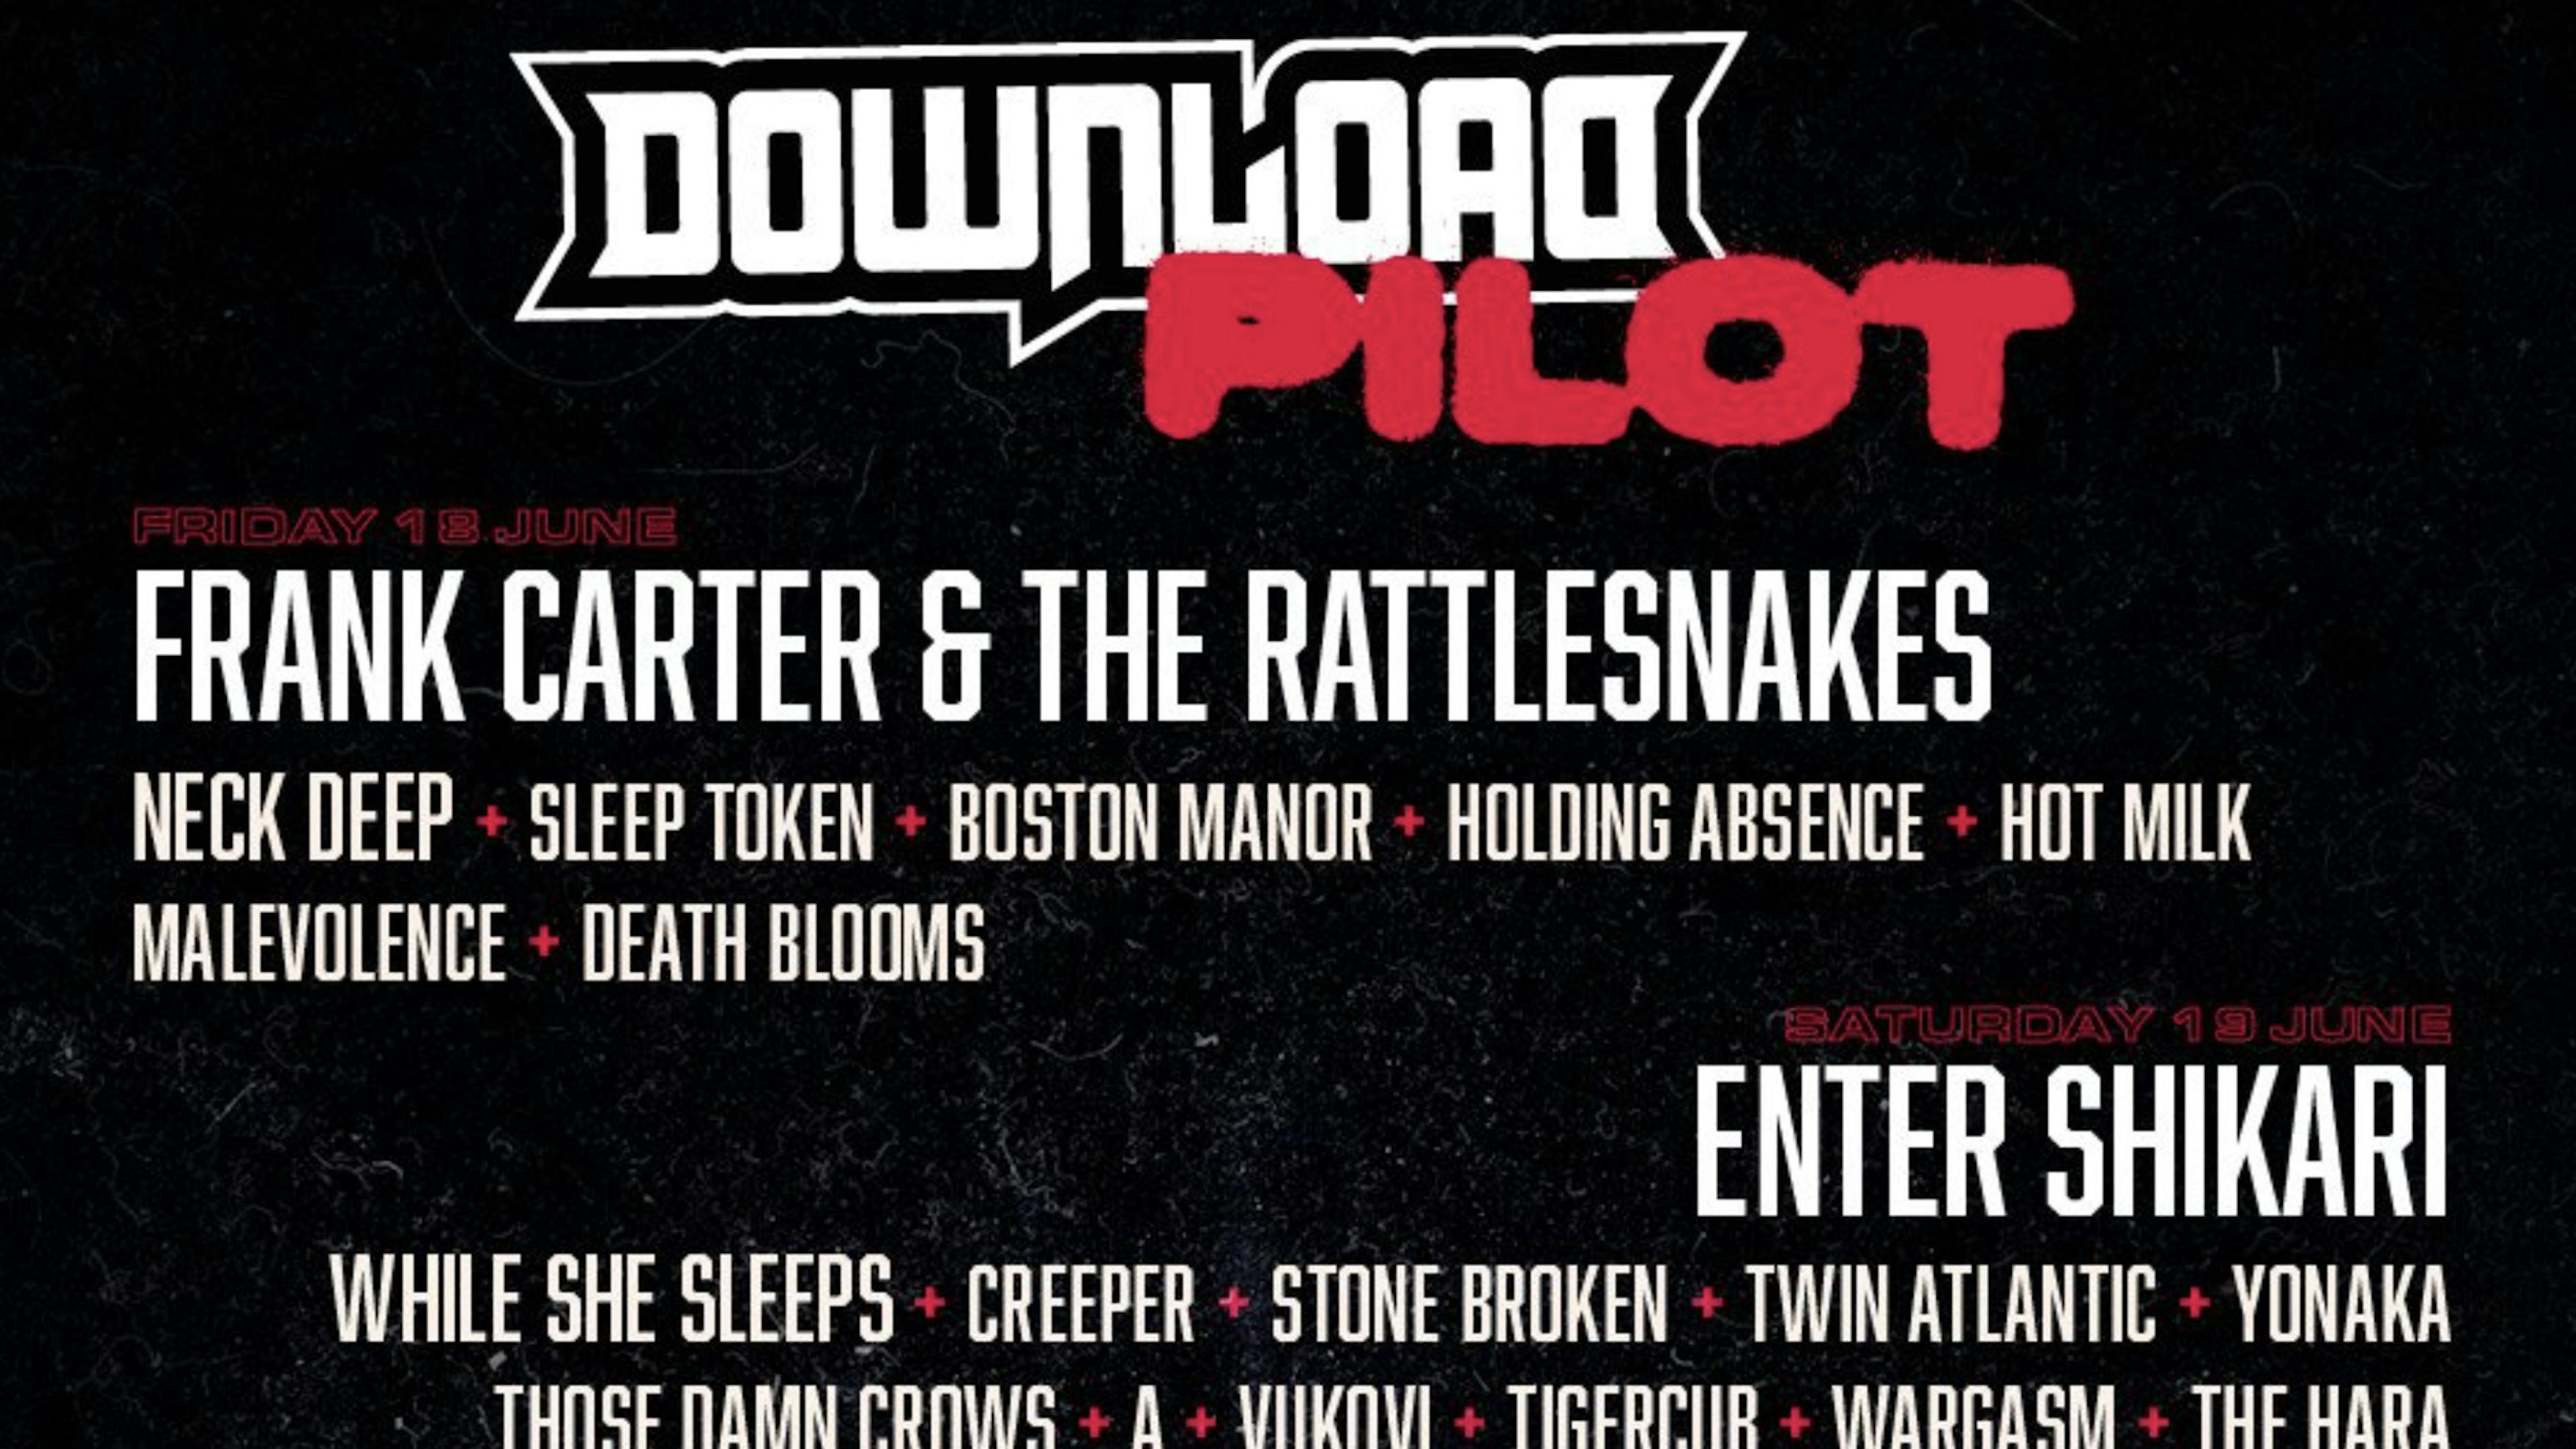 Stage times announced for Download Pilot 2021